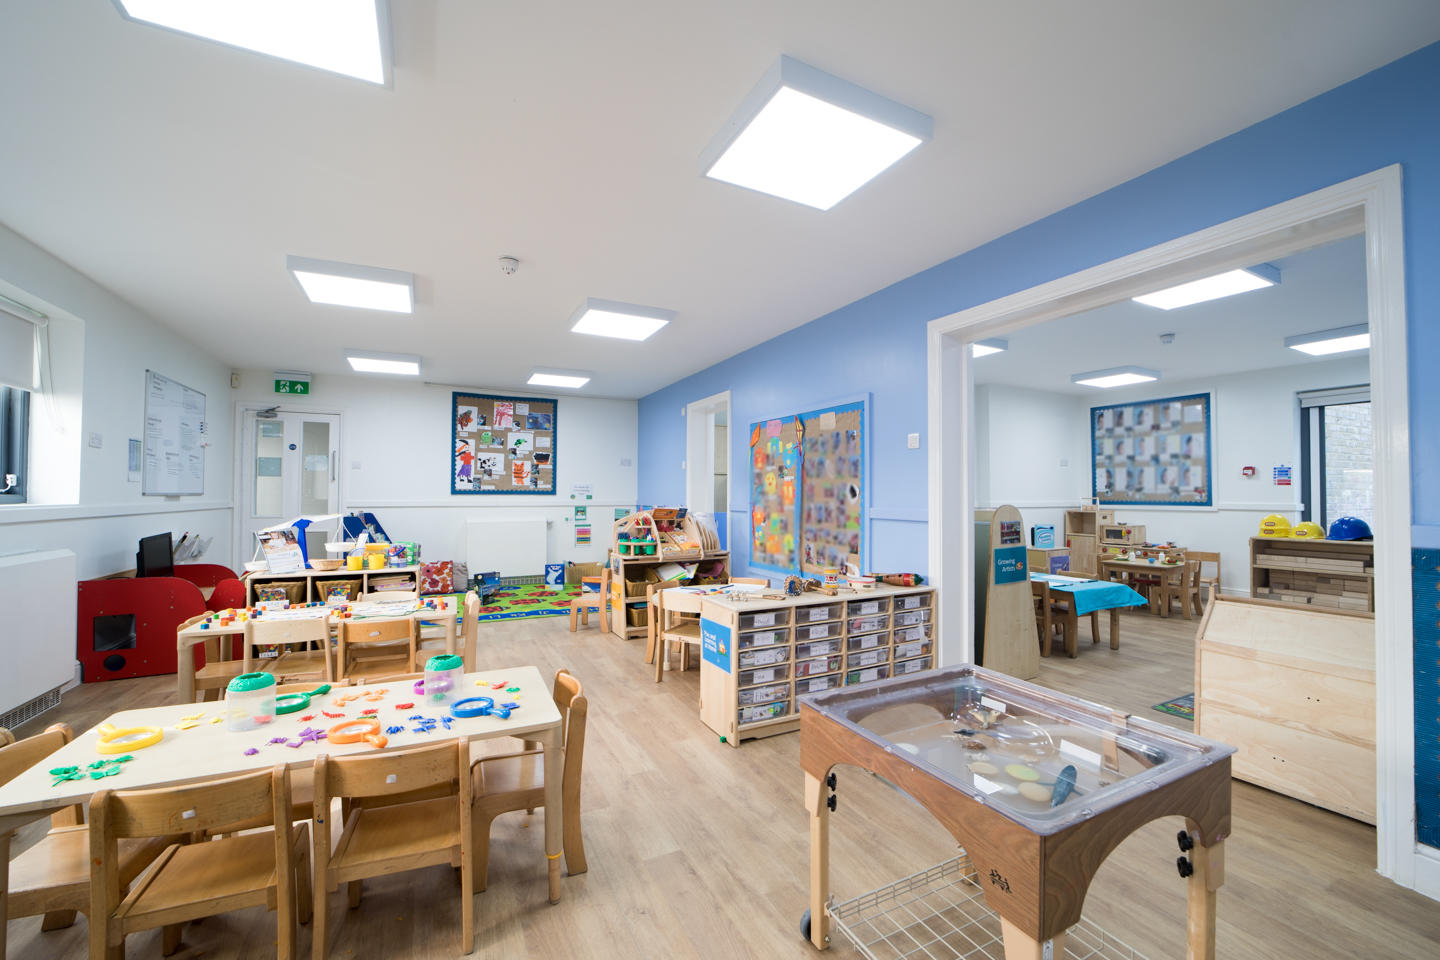 Images Bright Horizons Raynes Park Day Nursery and Preschool